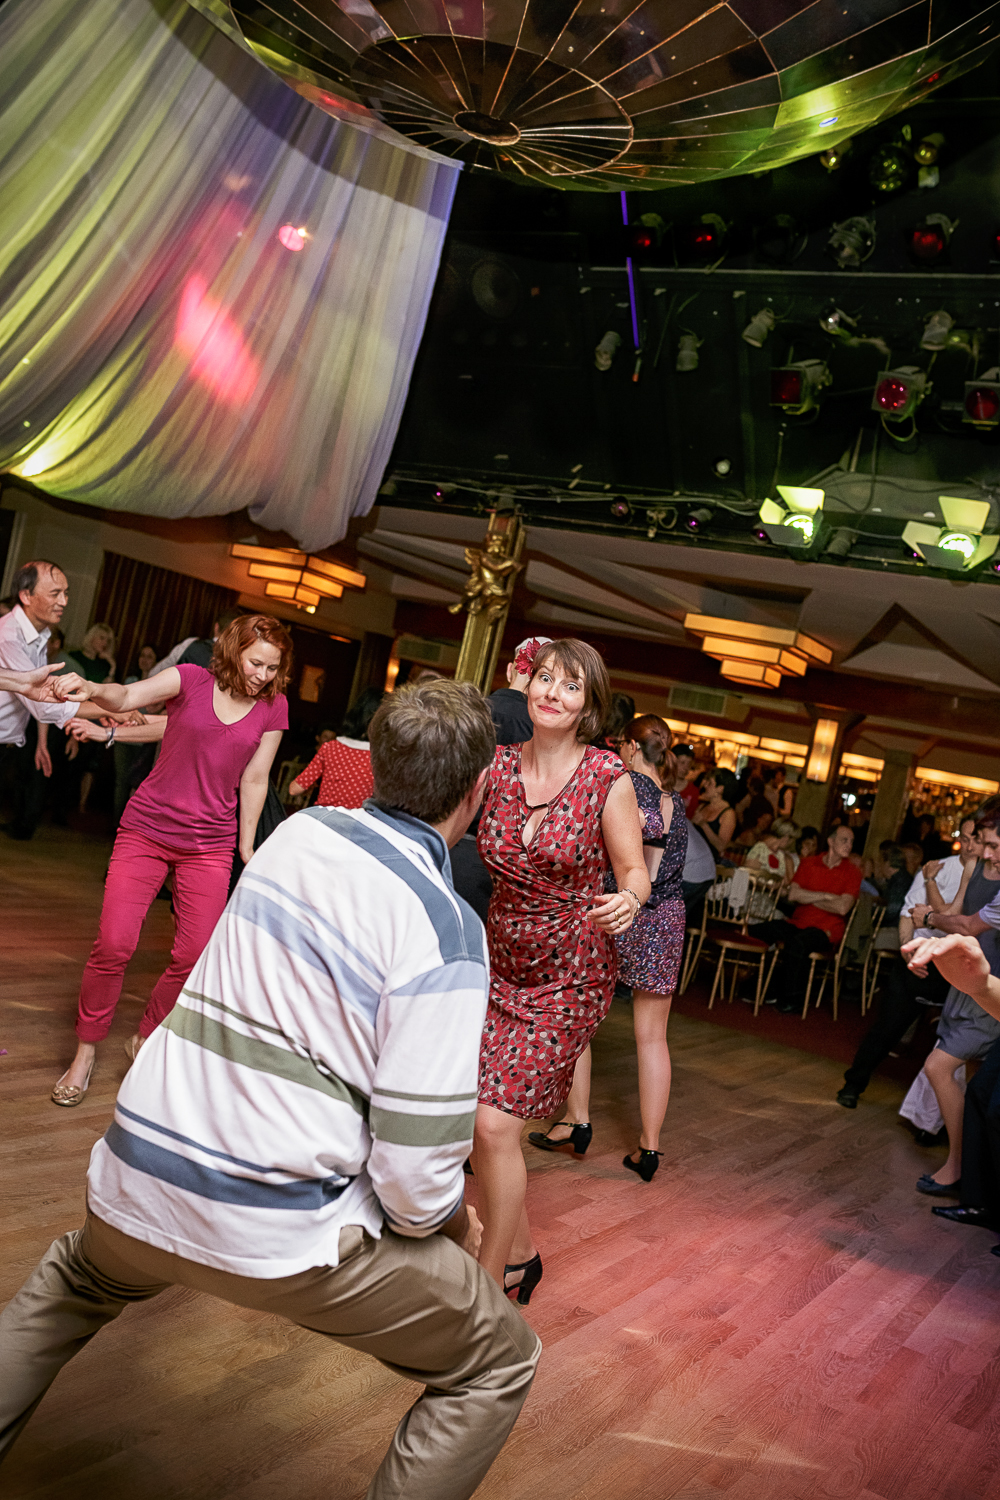  Bal Swing au Chalet du Lac - http://www.ebobrie.com/shake-that-swing-parties / https://www.facebook.com/photosForDancersOnly 